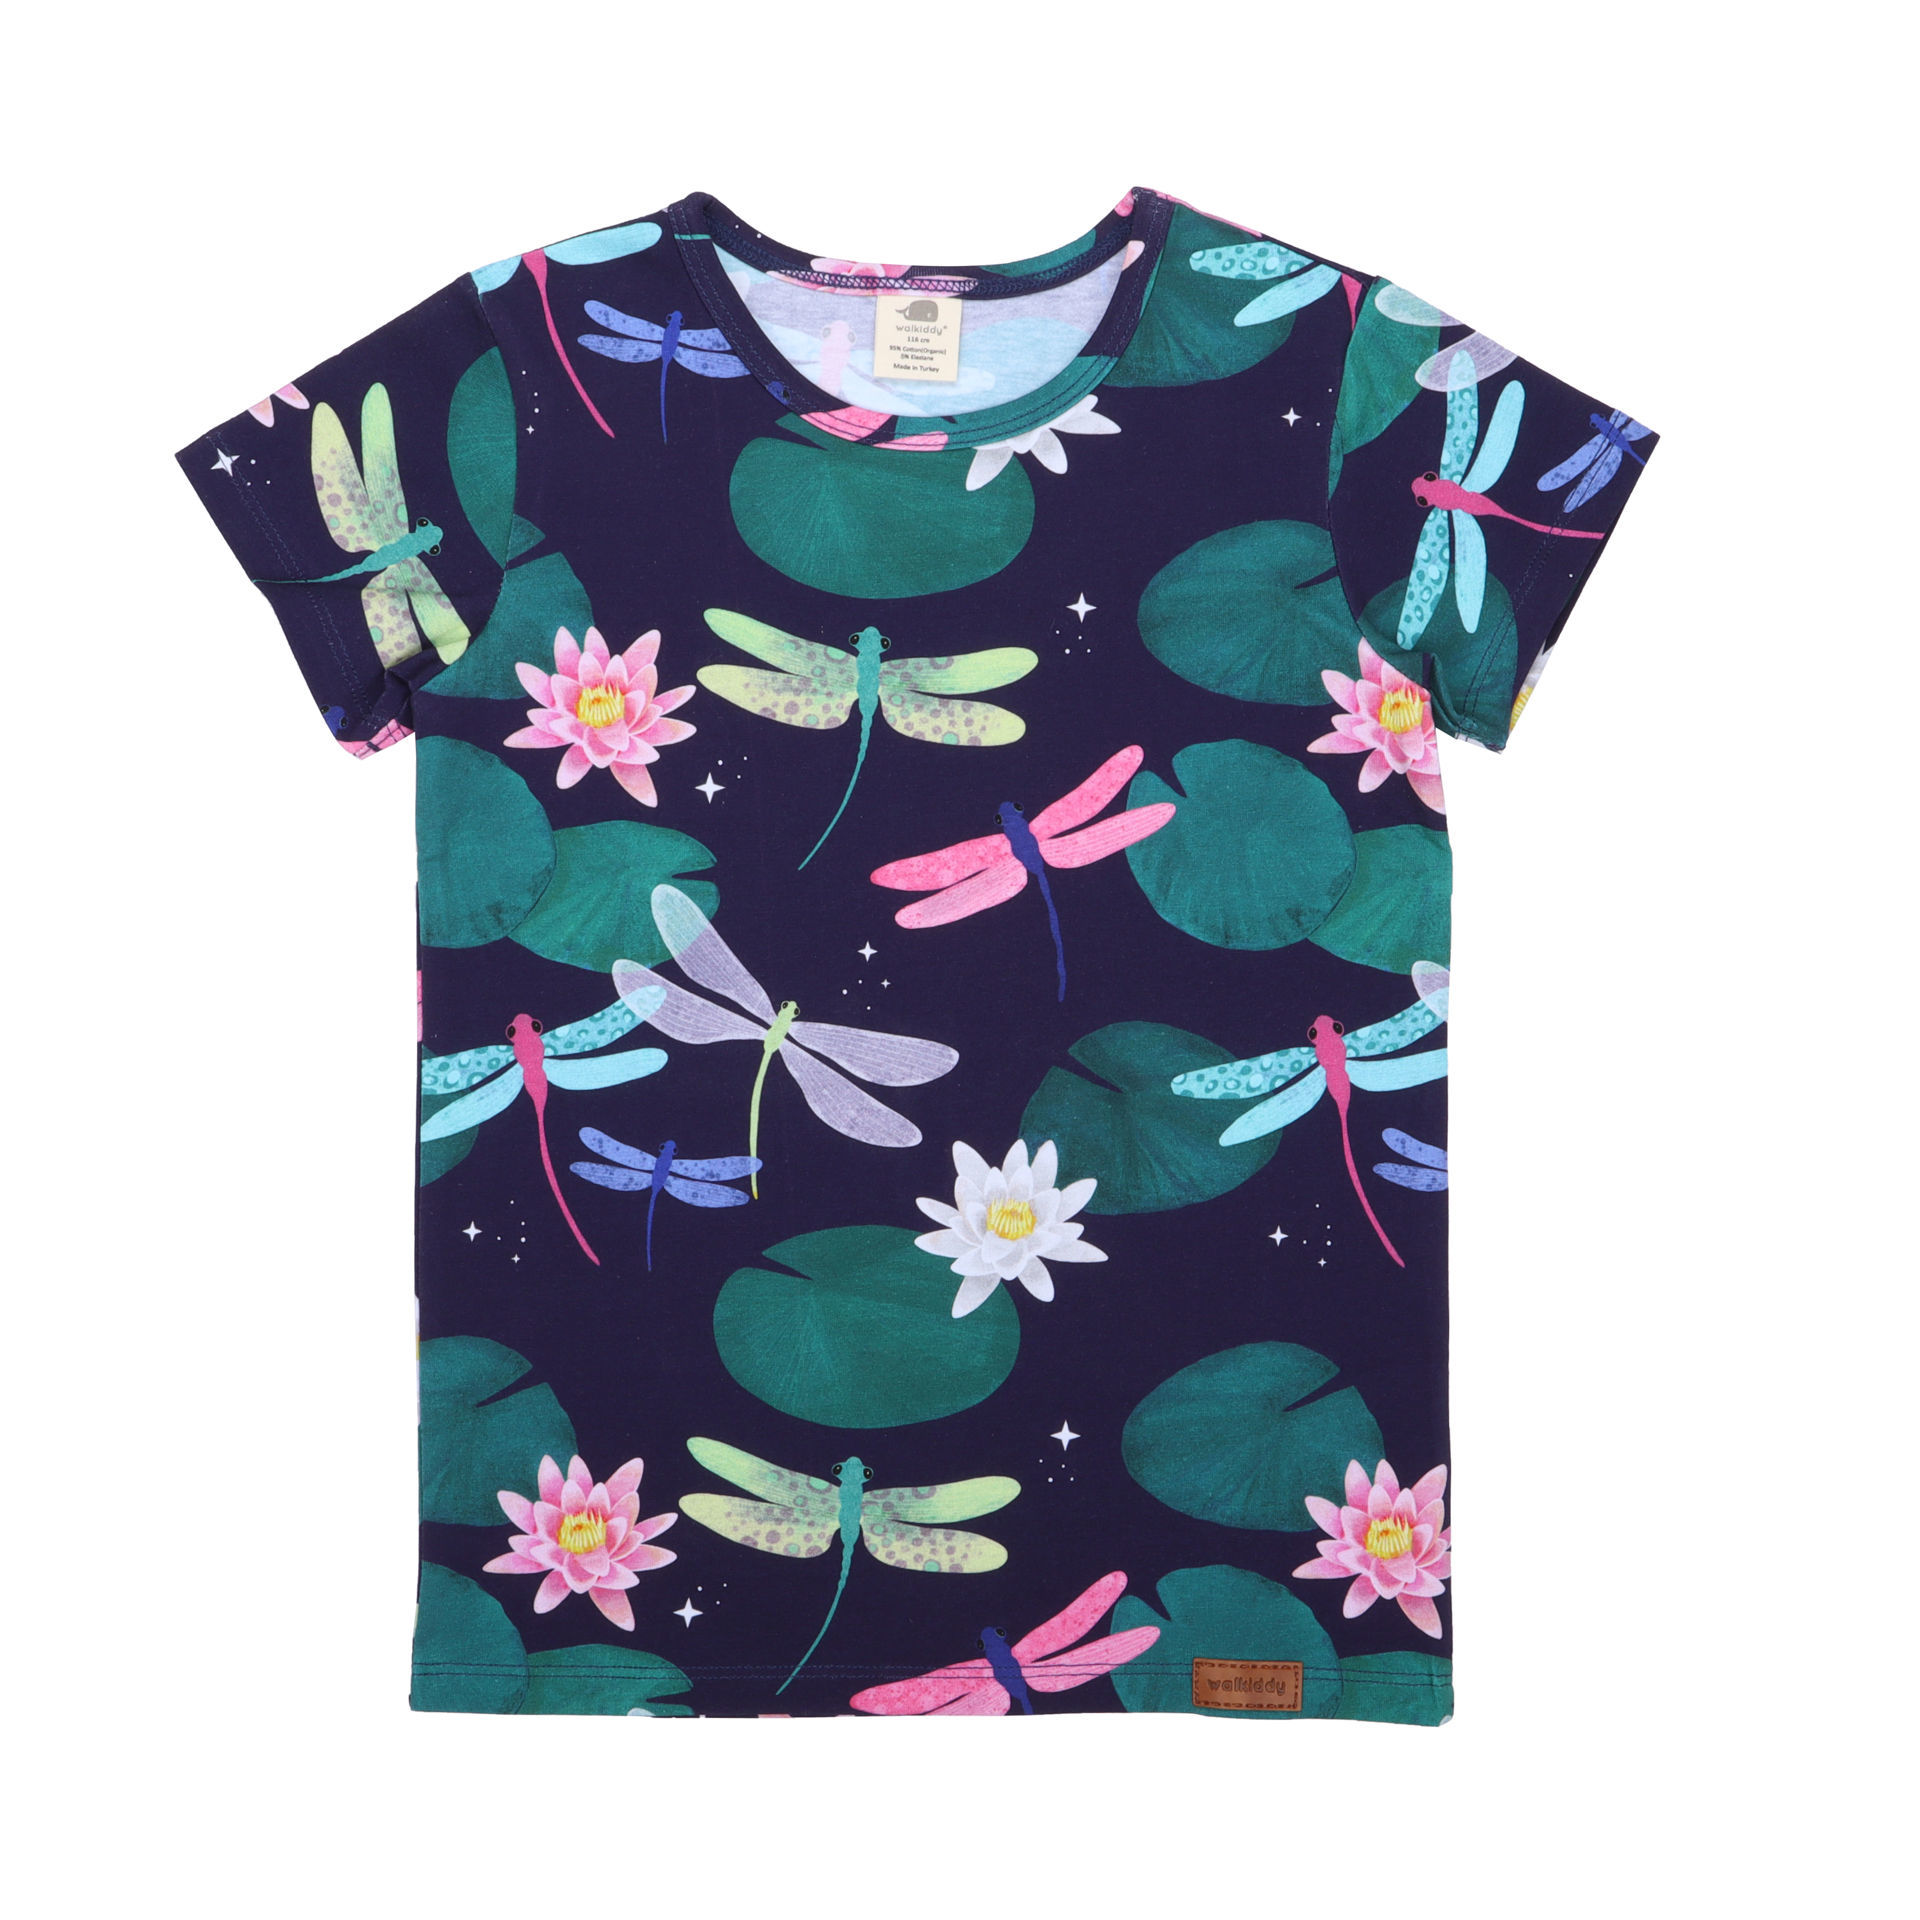 Walkiddy T-Shirt Colorful Dragonflies